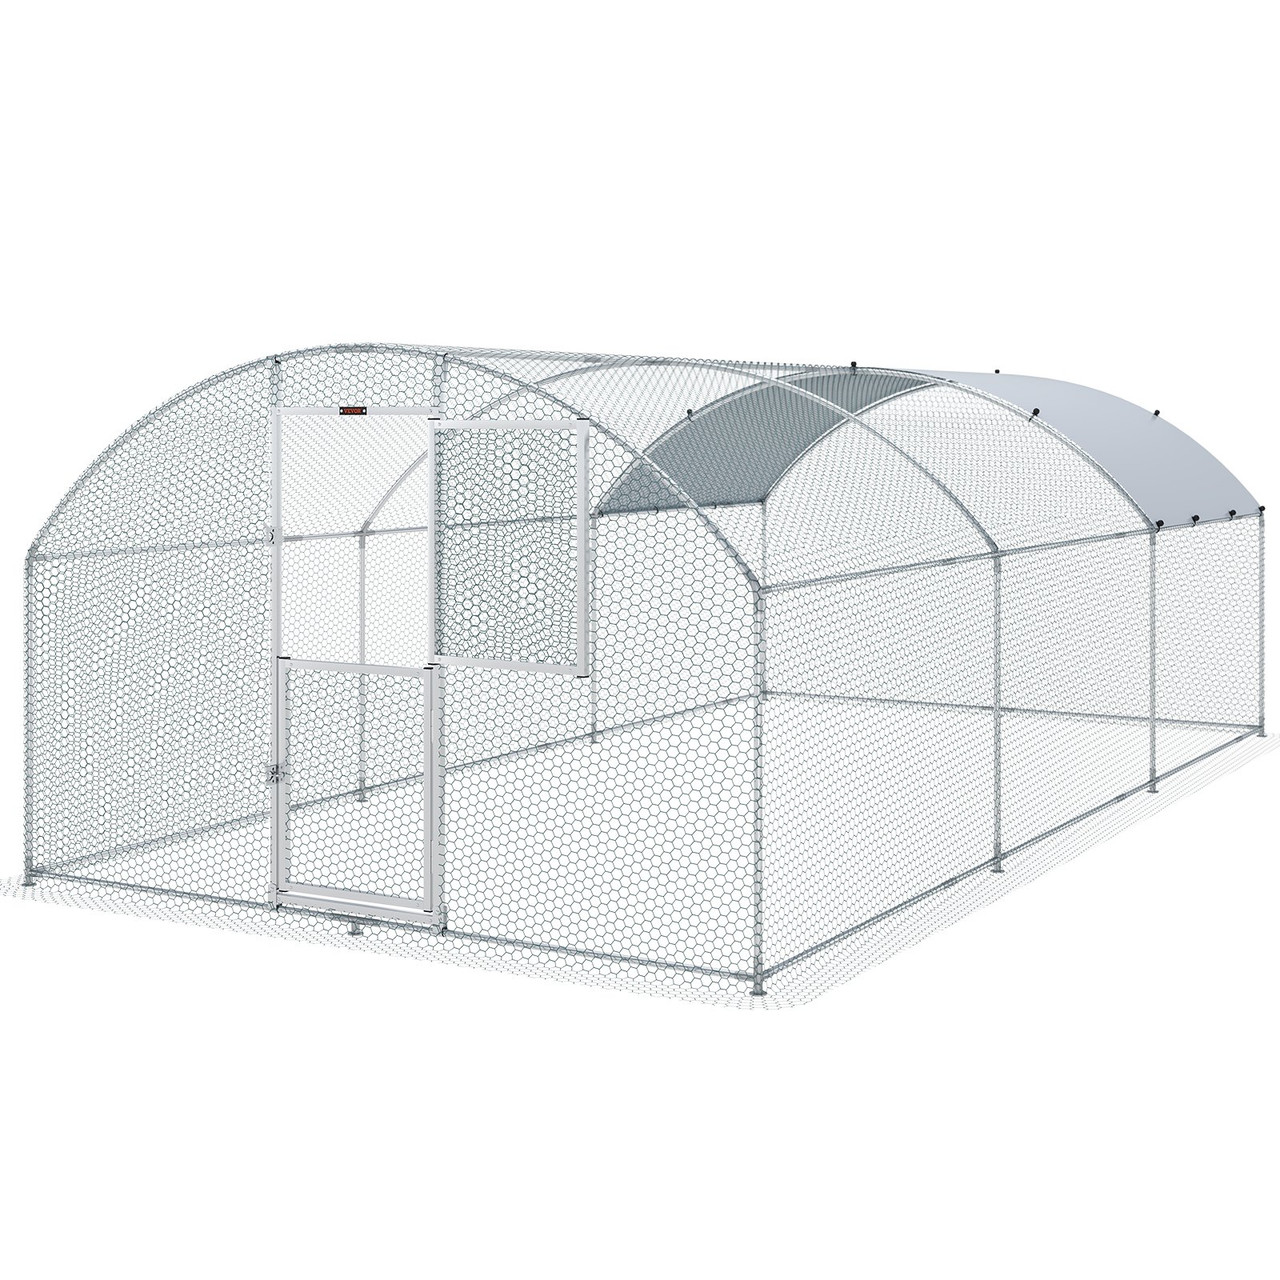 Large Metal Chicken Coop with Run, Walkin Chicken Coop for Yard with Waterproof Cover, 19.7 x 9.8 x 6.6 ft, Dome Roof Large Poultry Cage for Hen House, Duck Coop and Rabbit Run, Silver